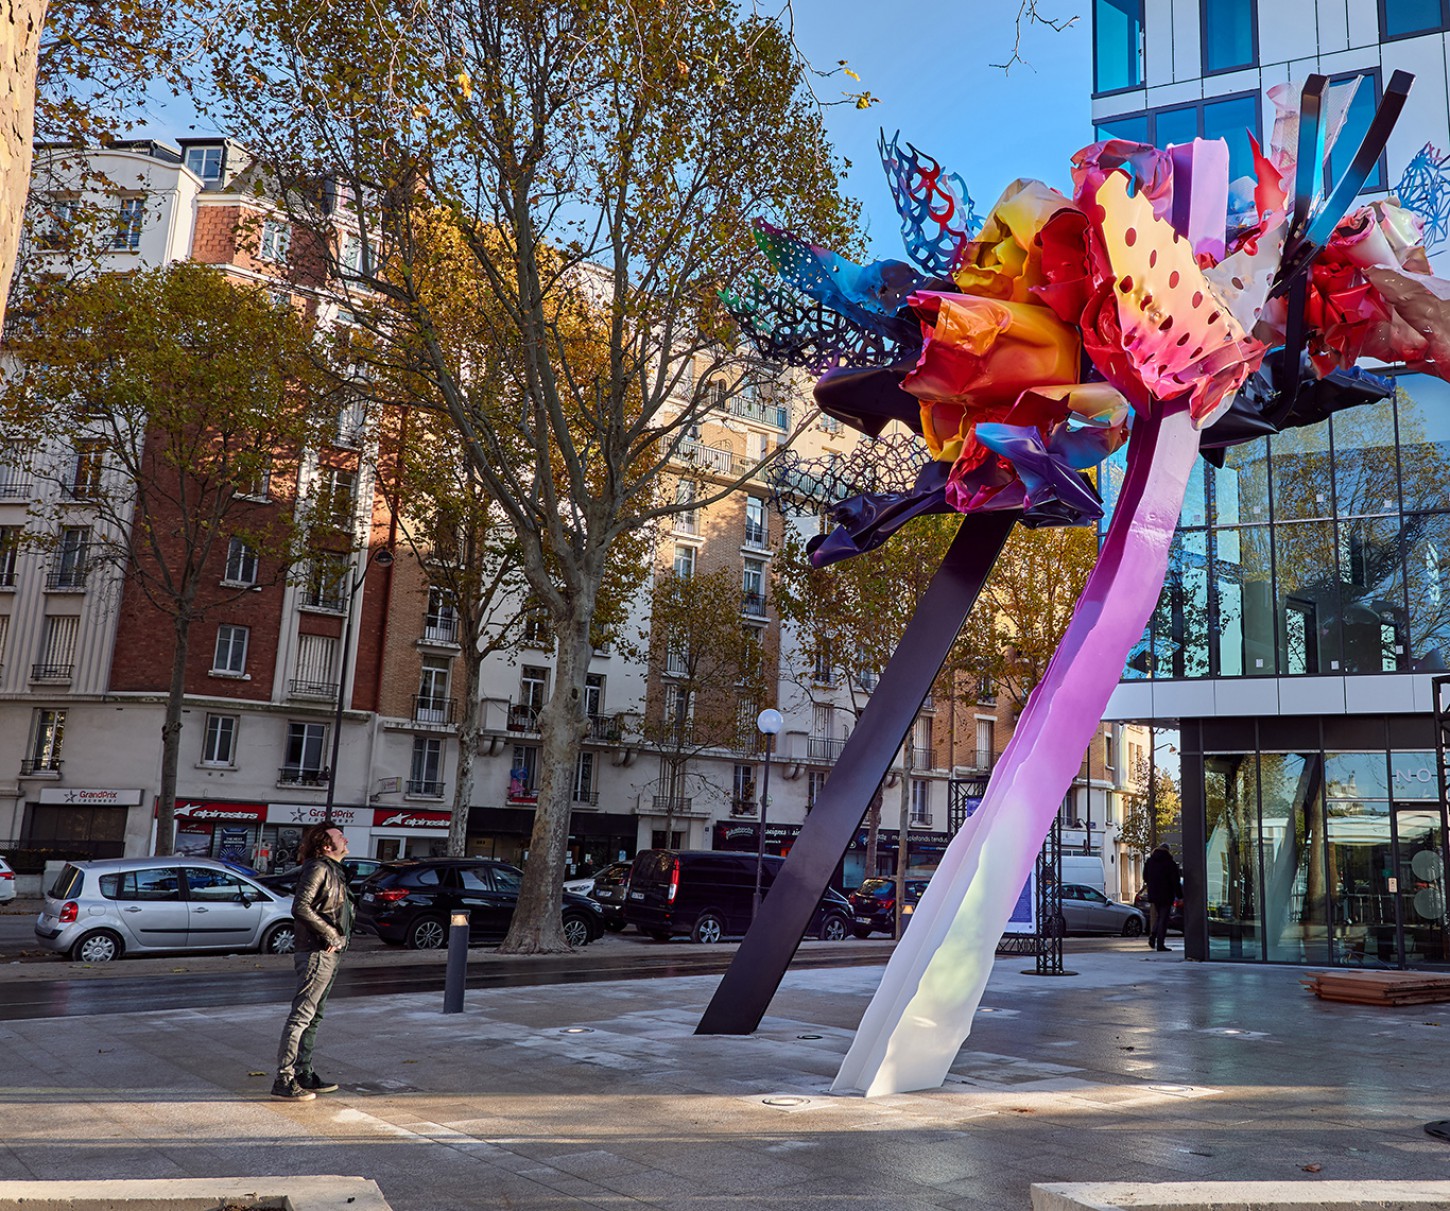 The first permanent public art sculpture by Arne Quinze in France